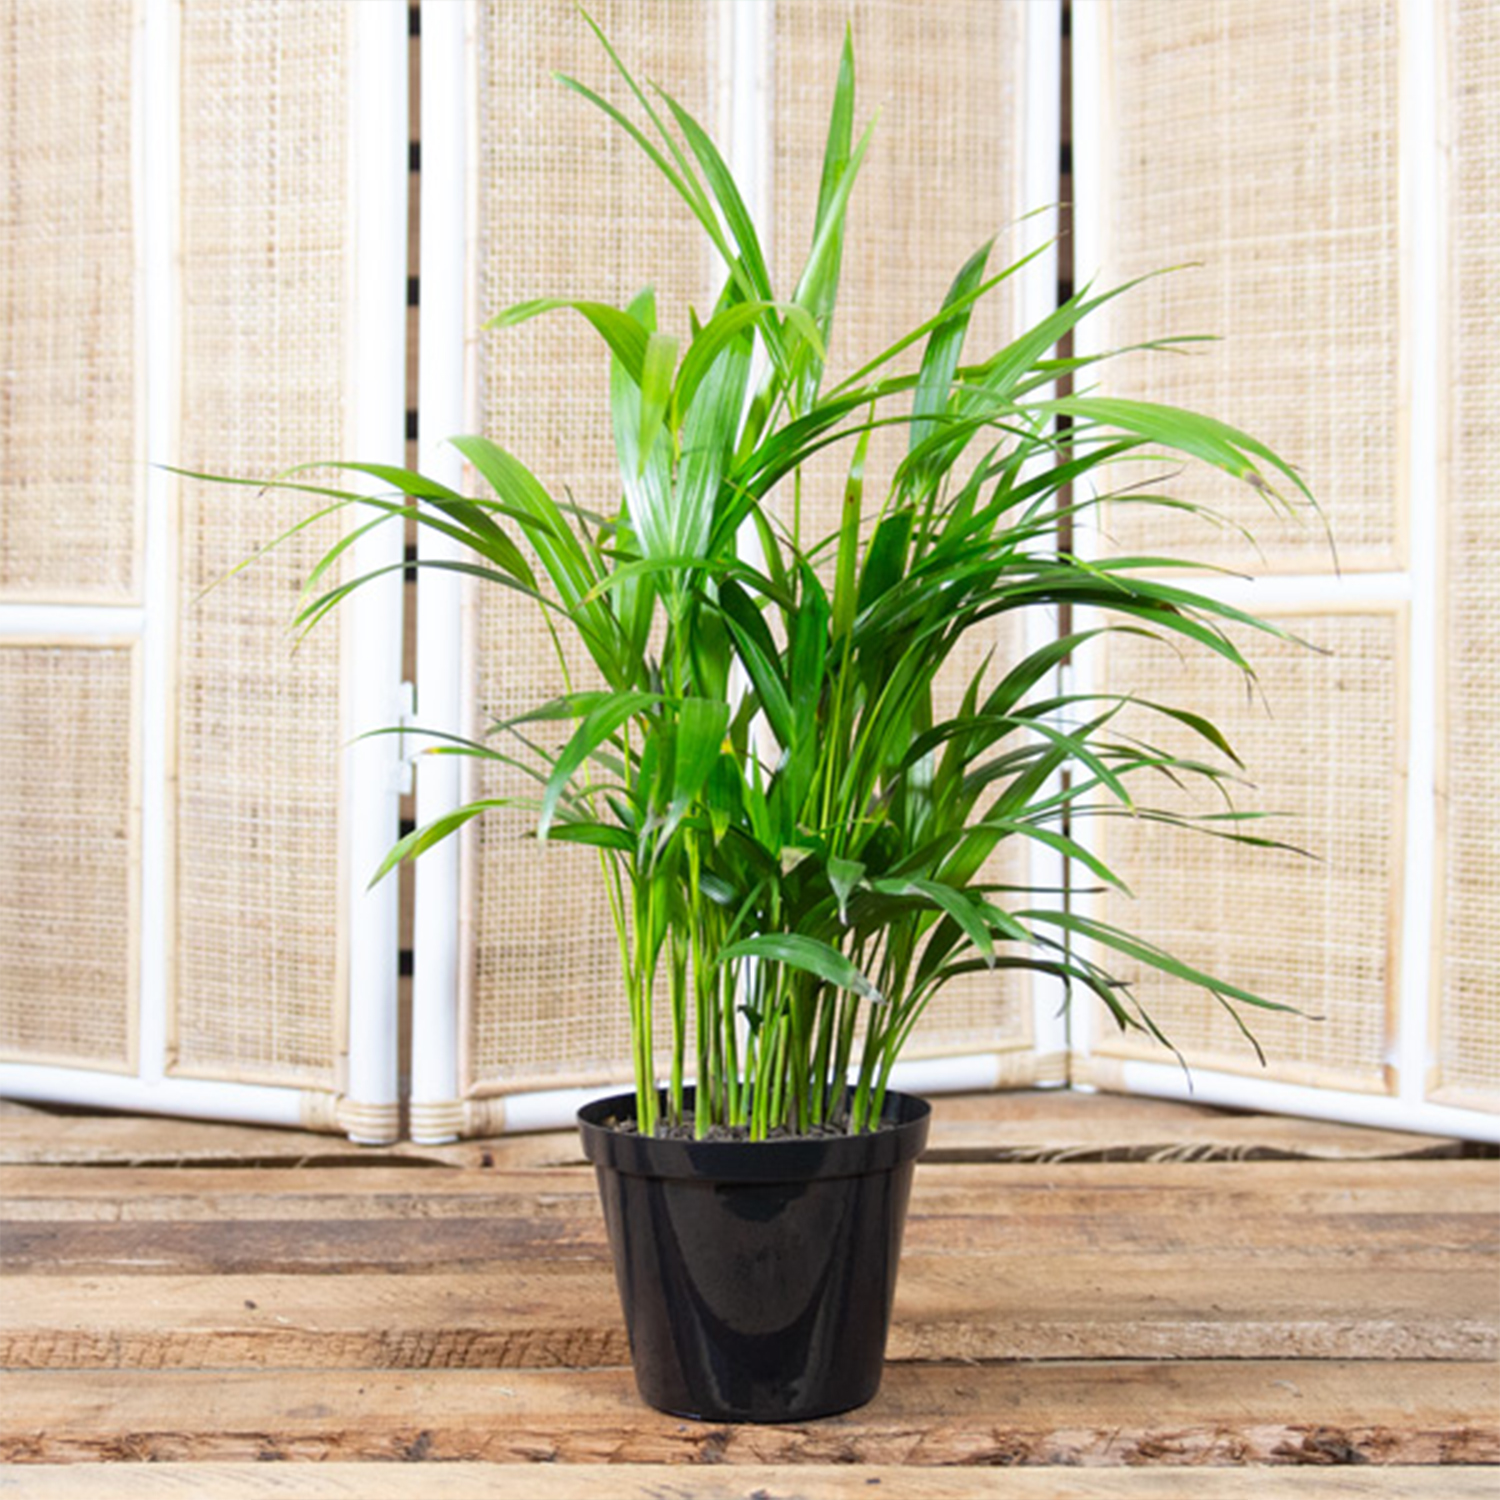 bamboo palm plant